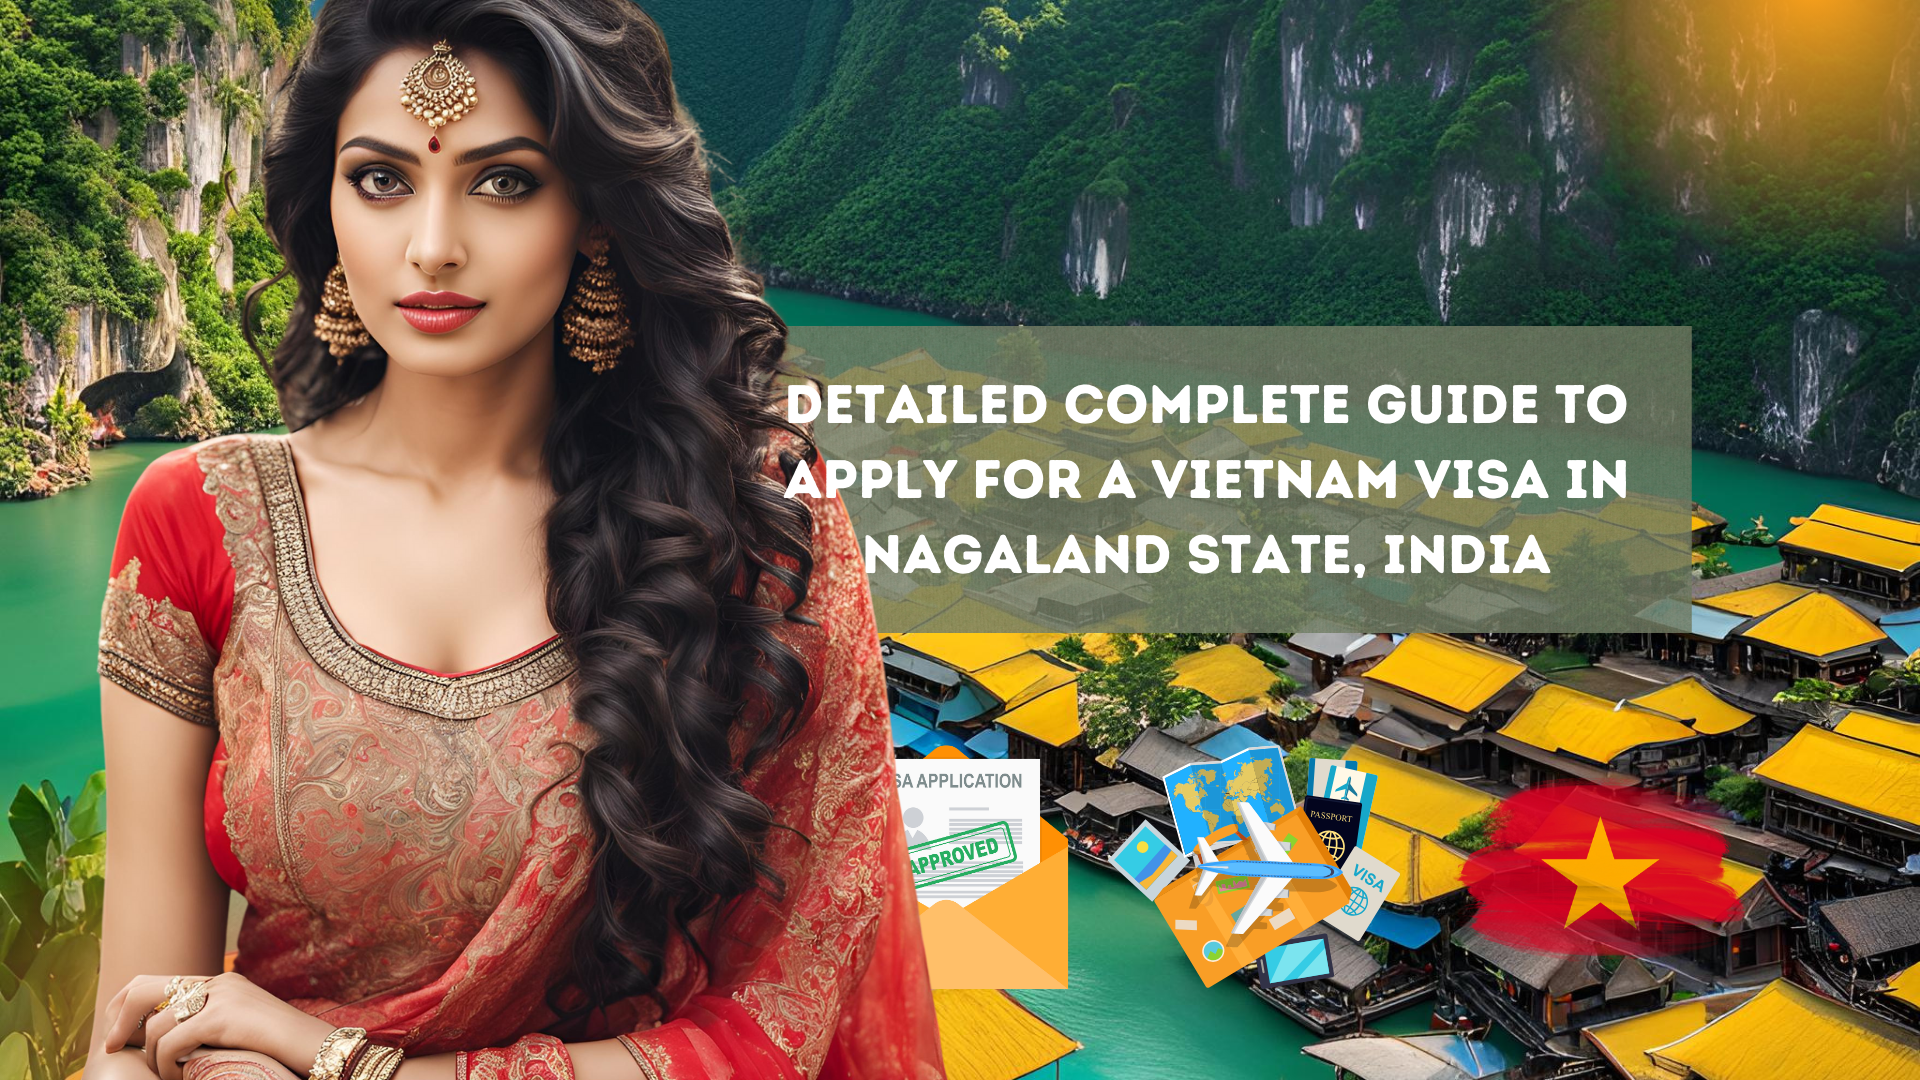 Detailed Complete Guide to Apply for a Vietnam Visa in Nagaland State, India